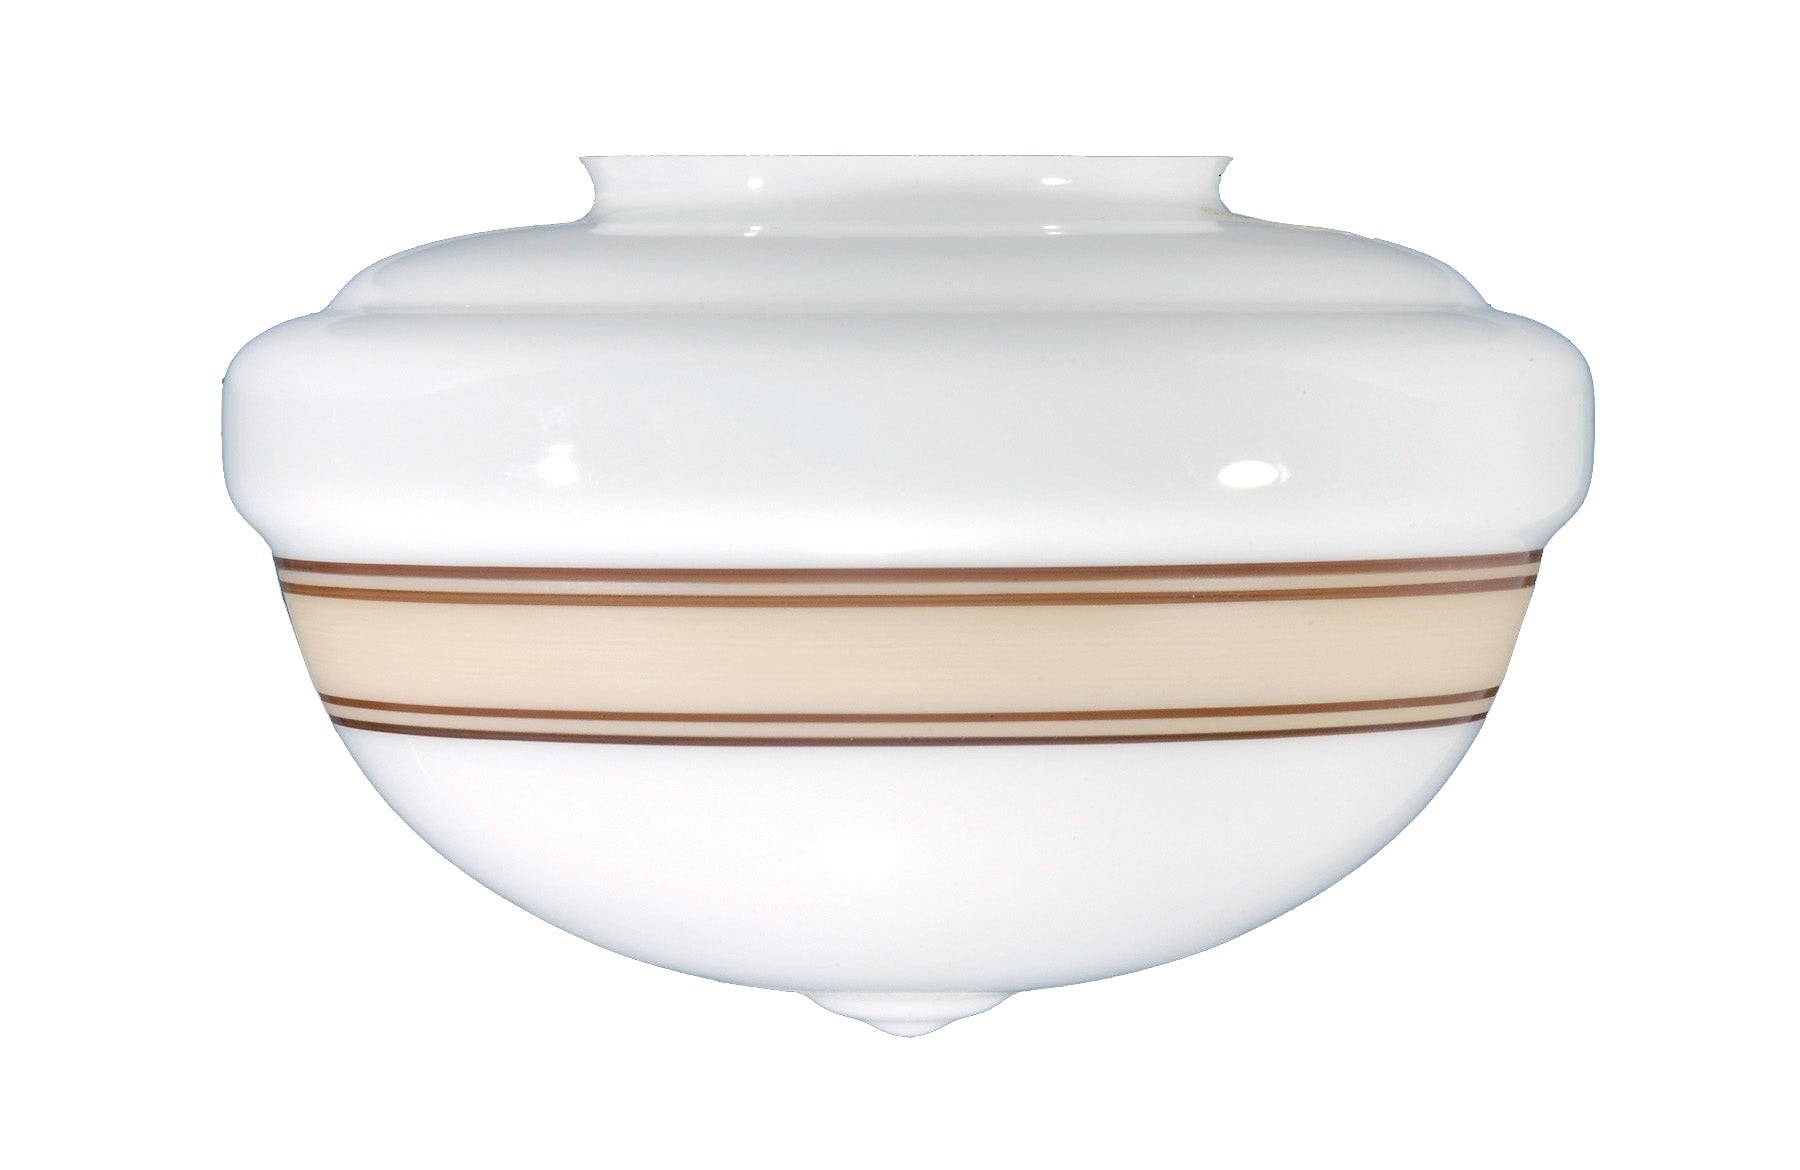 Opal Schoolhouse Shade, Light Tan Band, 4 or 6 inch lip fitter